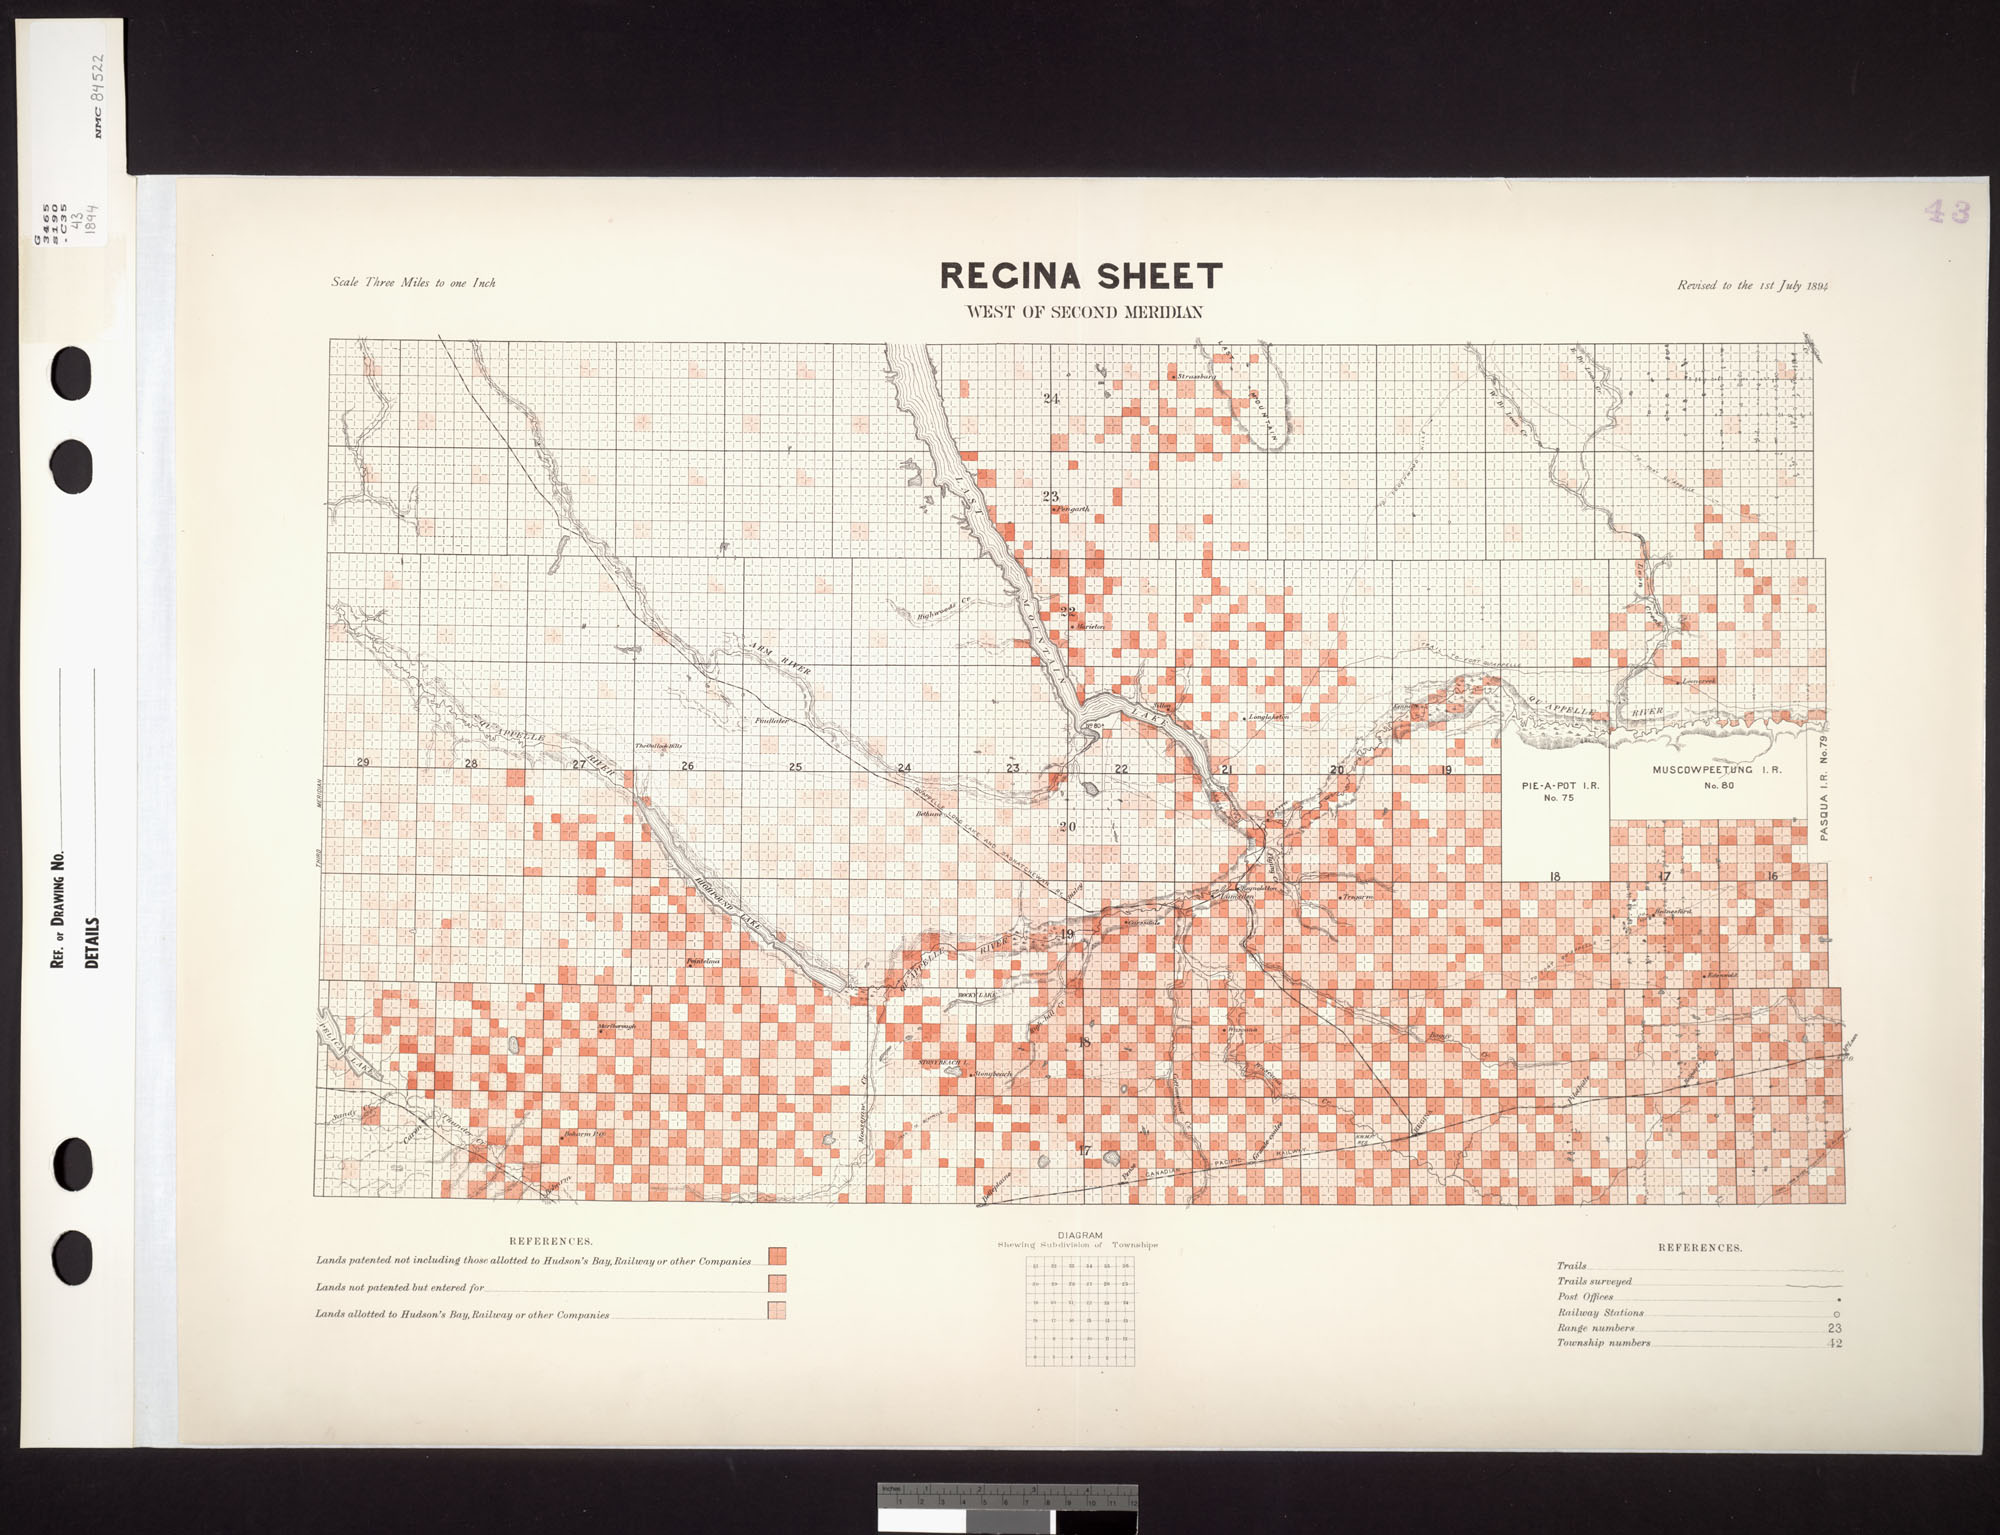 Digitized image of map no. 43, Regina, west of the second meridian, MIKAN 3698318, image number e002419282